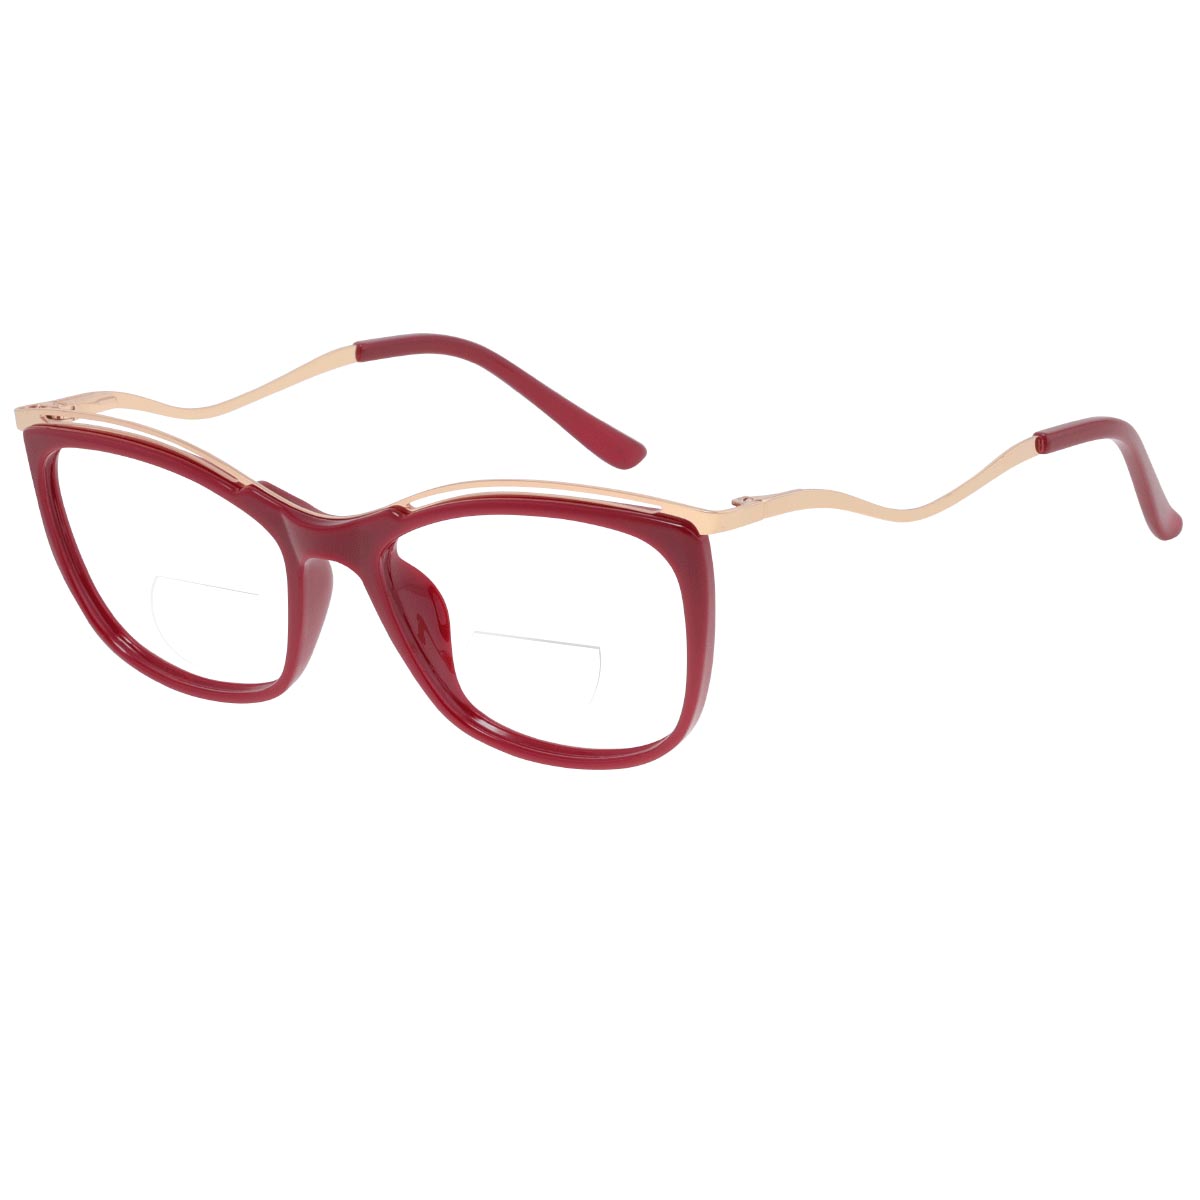 Annon - Square Red Reading Glasses for Women